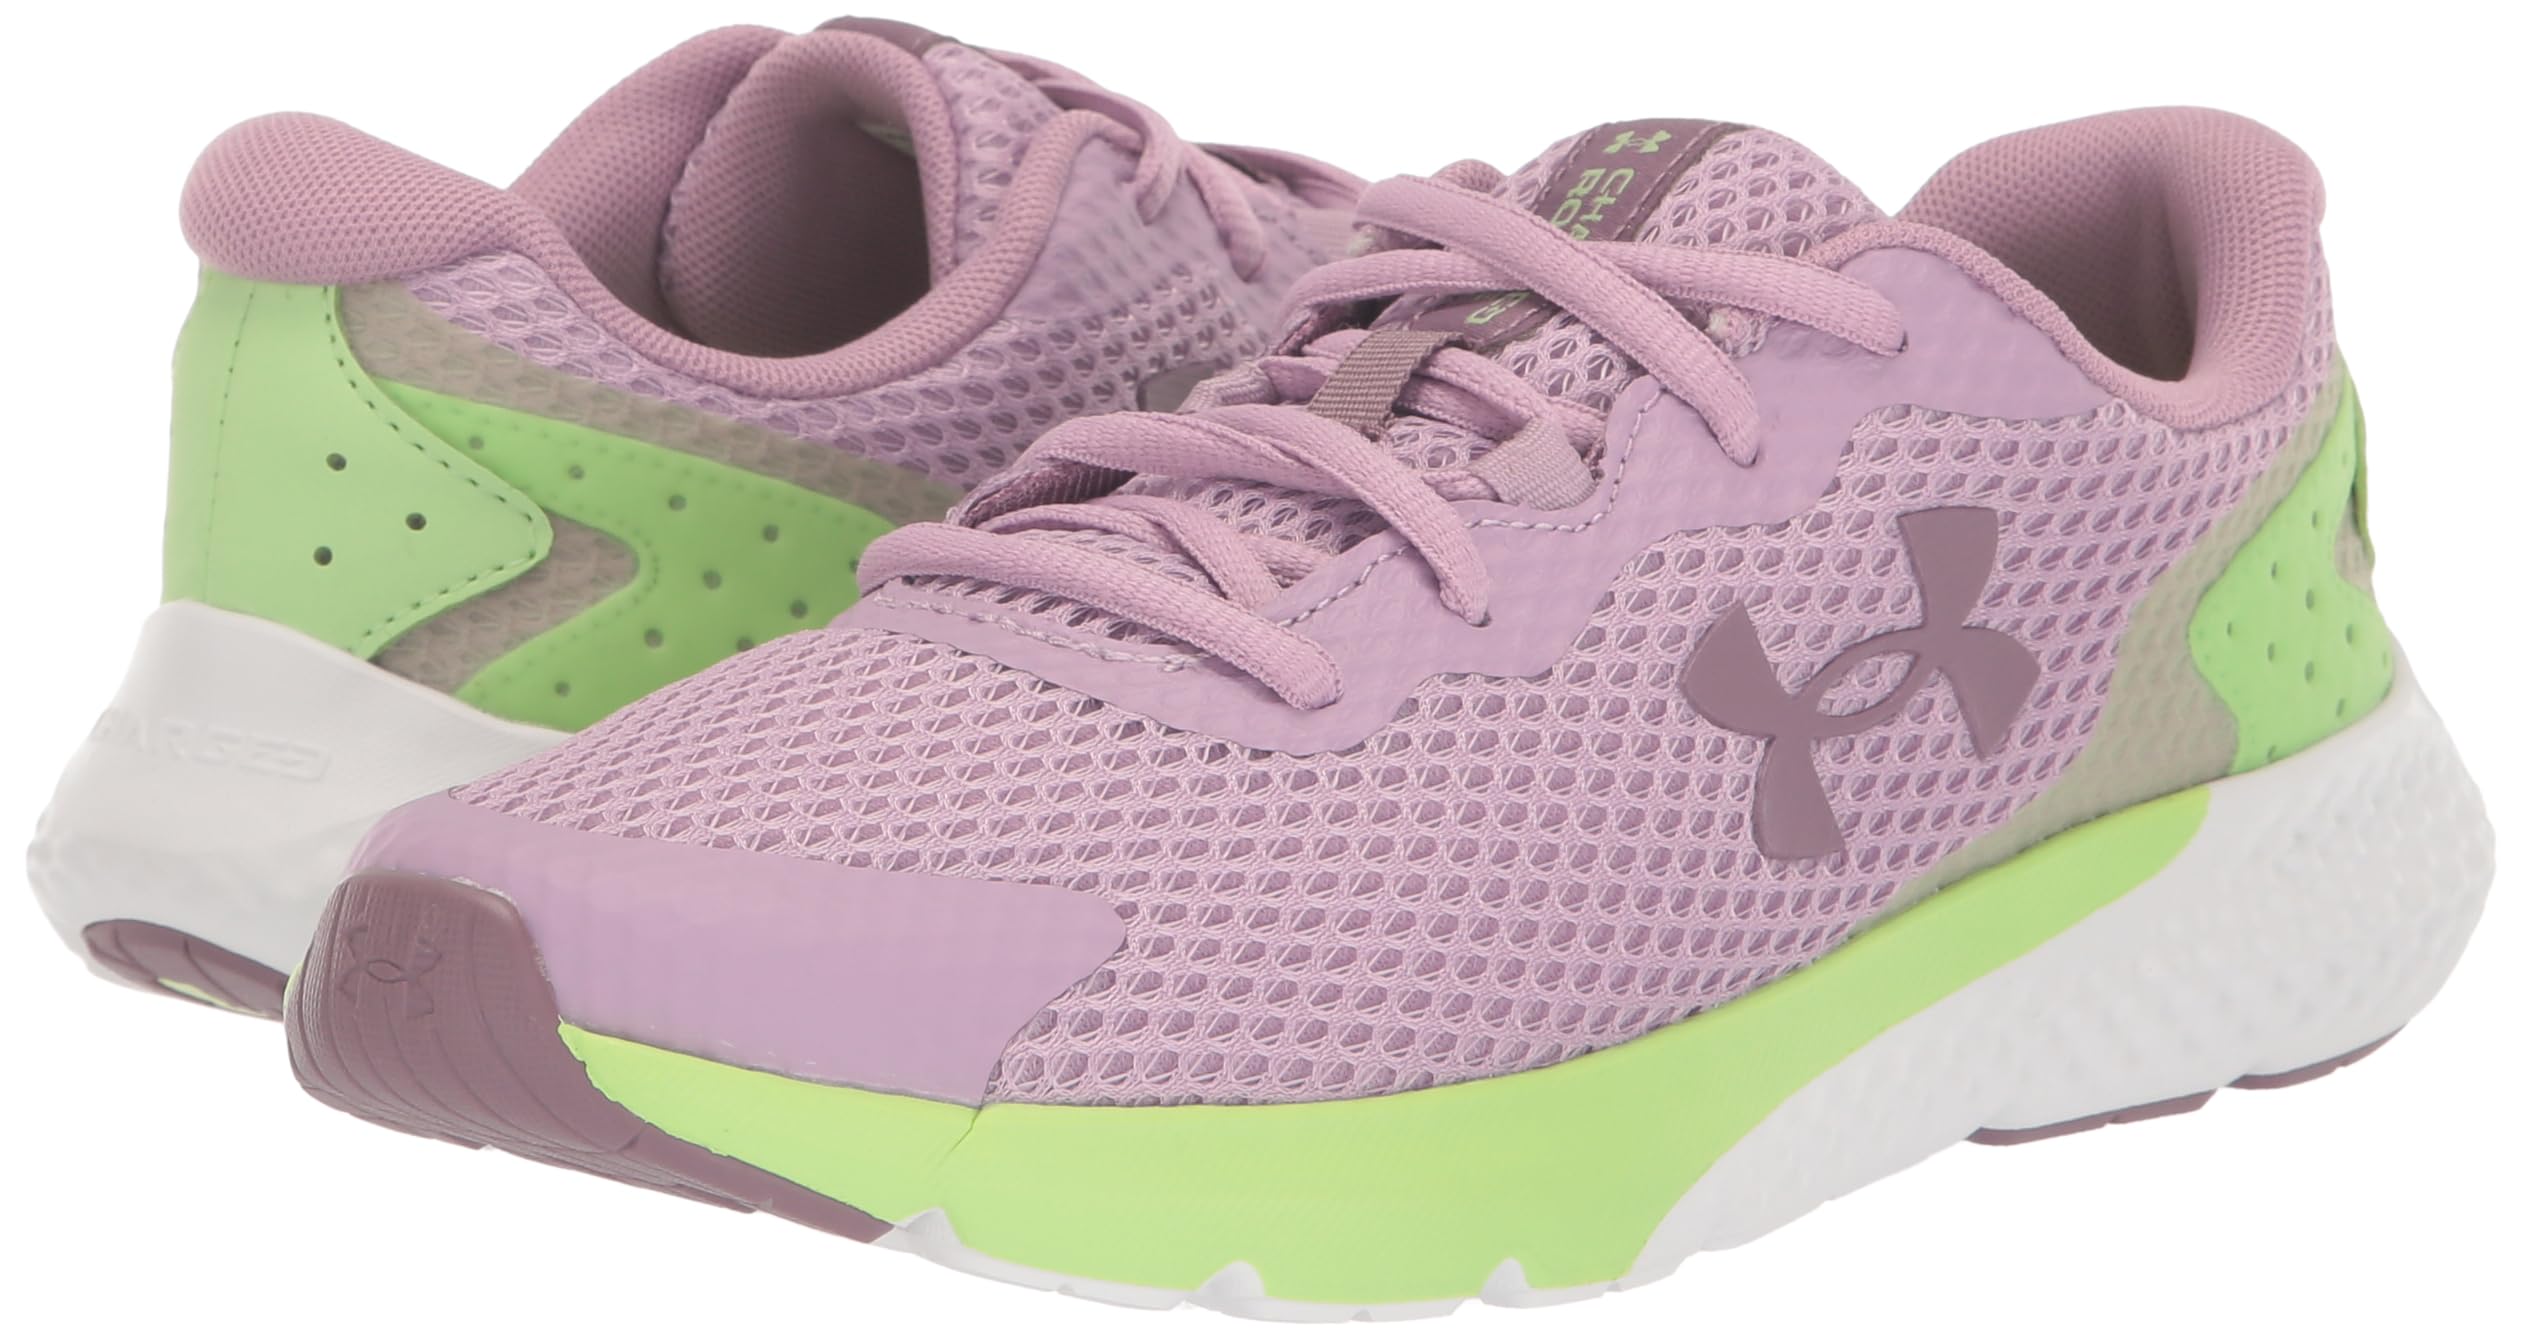 Under Armour Unisex-Child Charged Rogue 3 Running Shoe